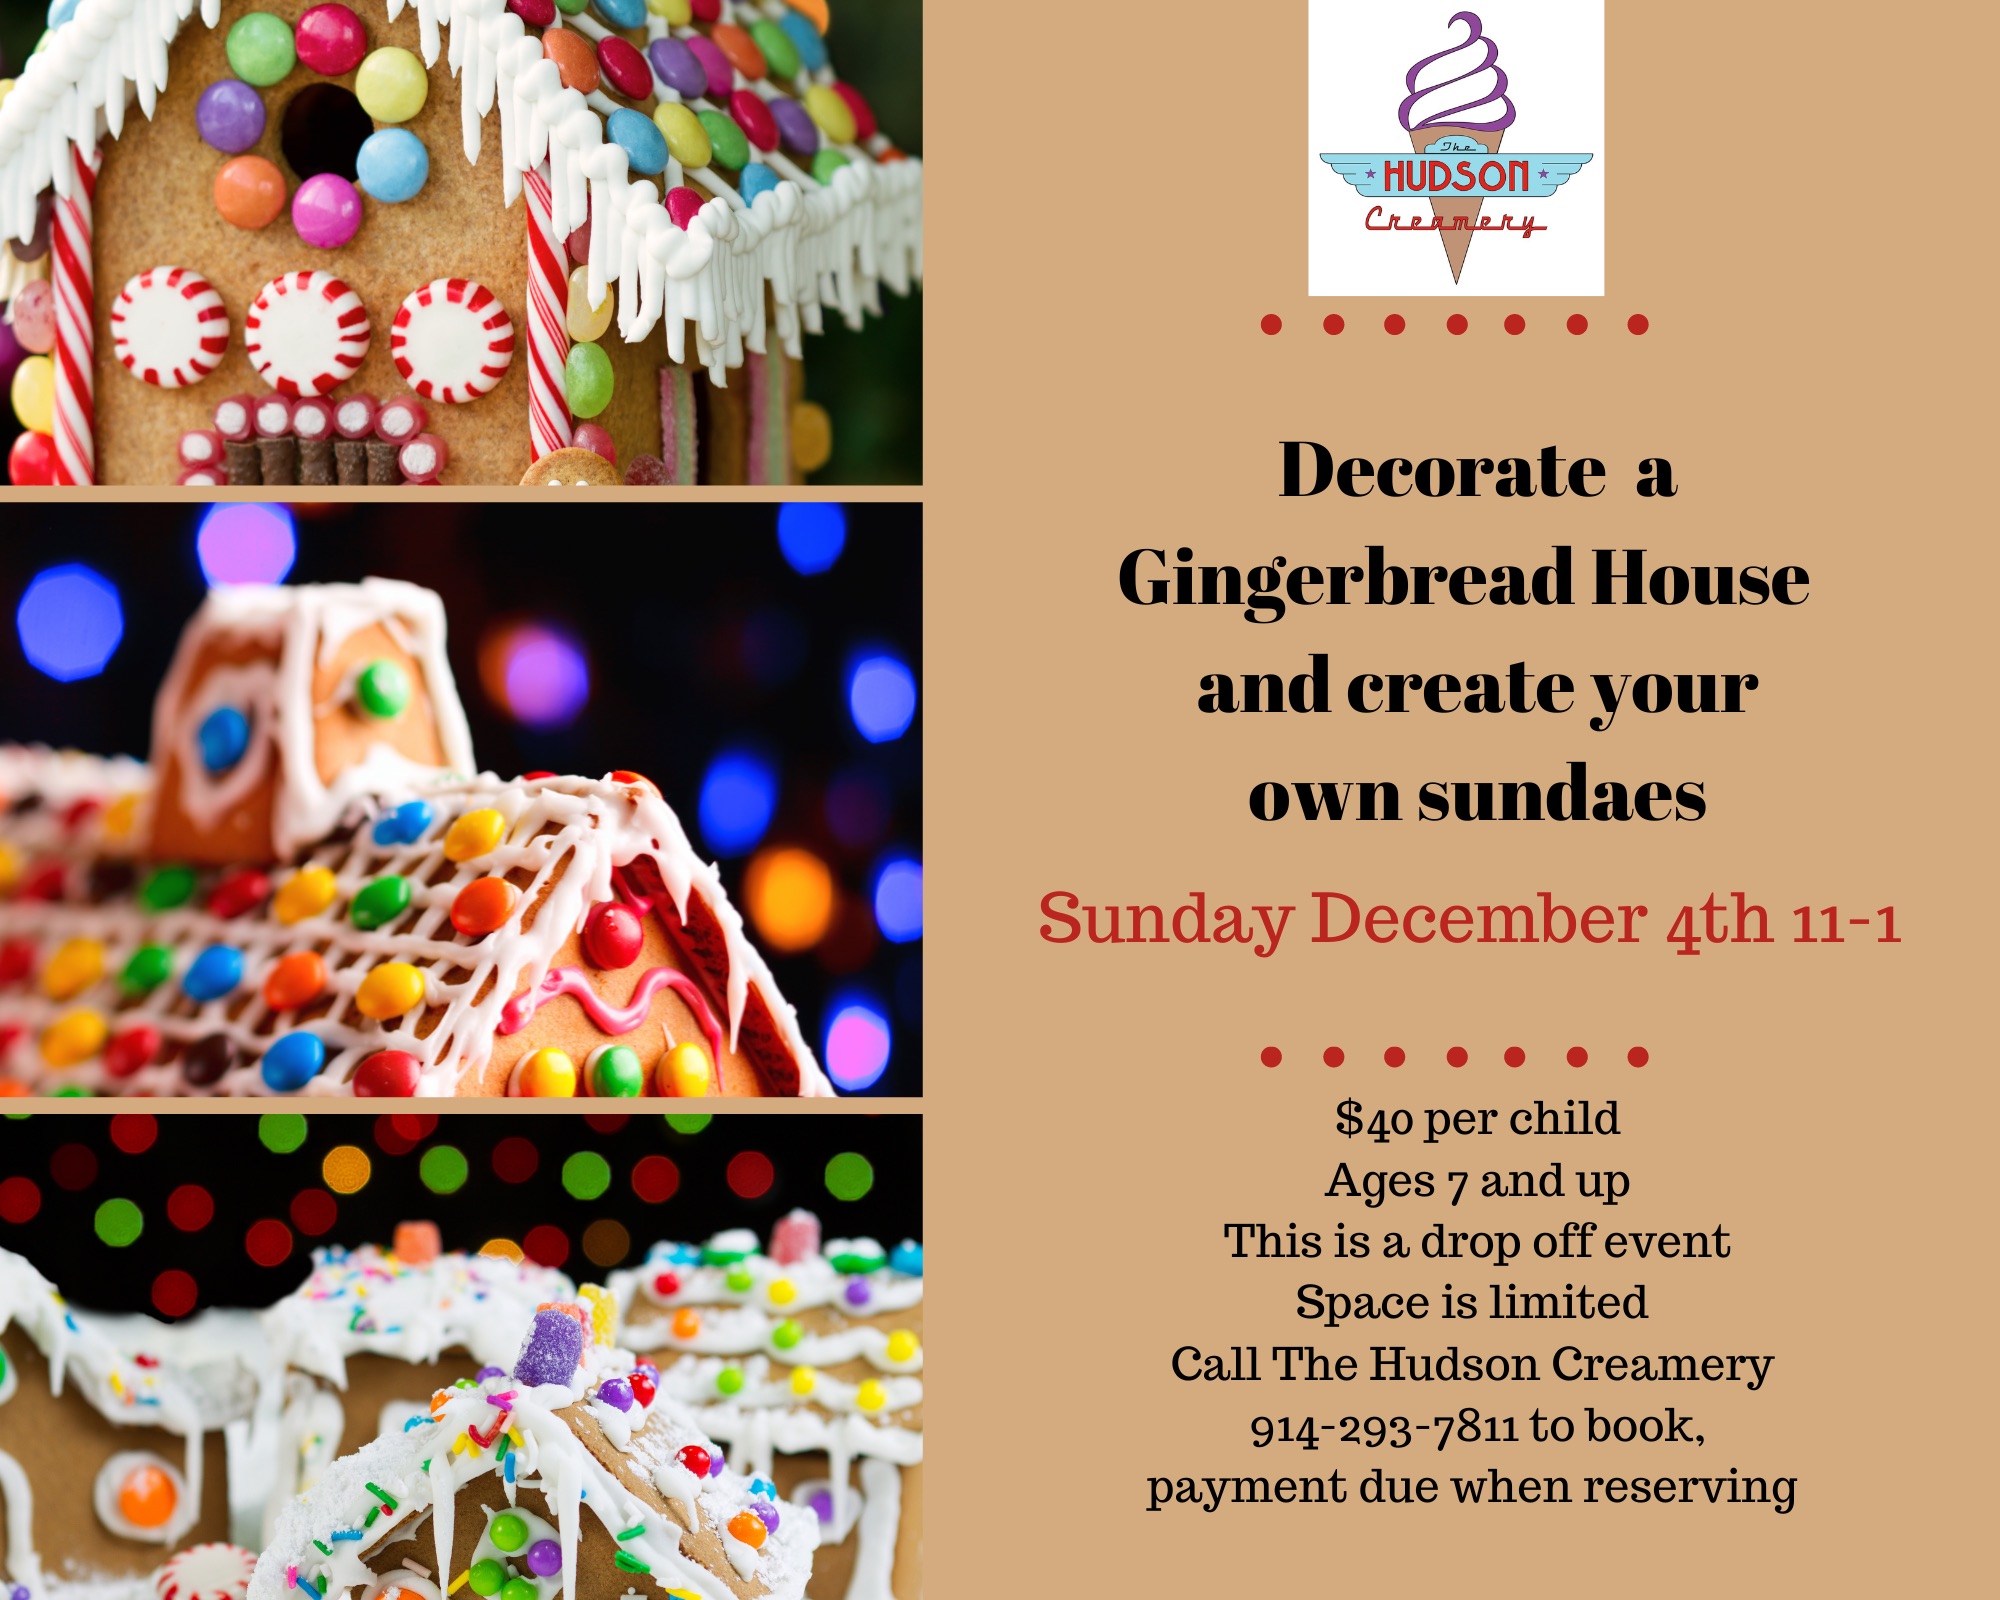 Decorate a Gingerbread House and create your own sundaes